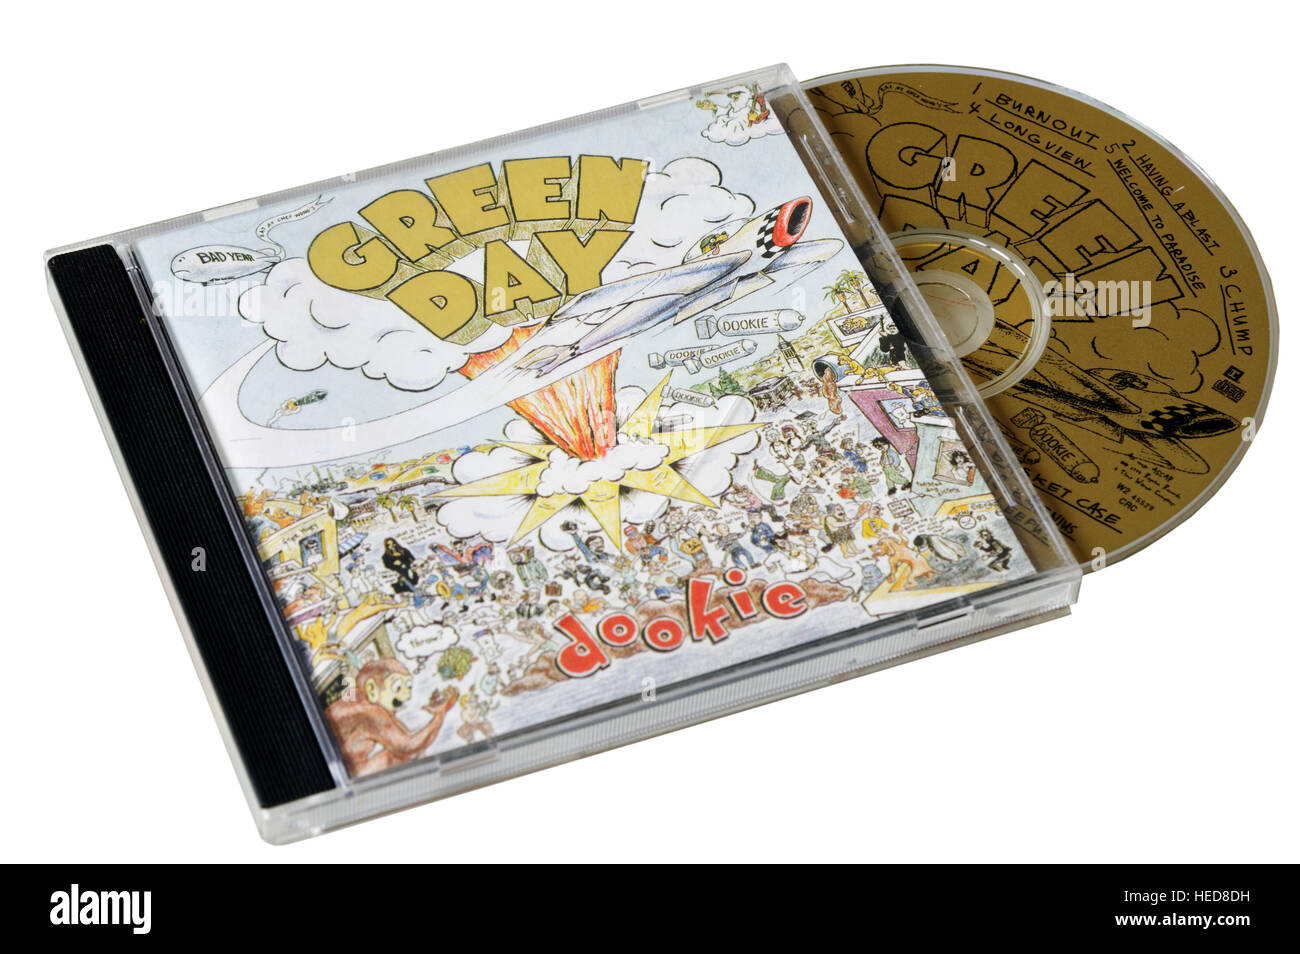 Green Day Dookie CD Foto Stock